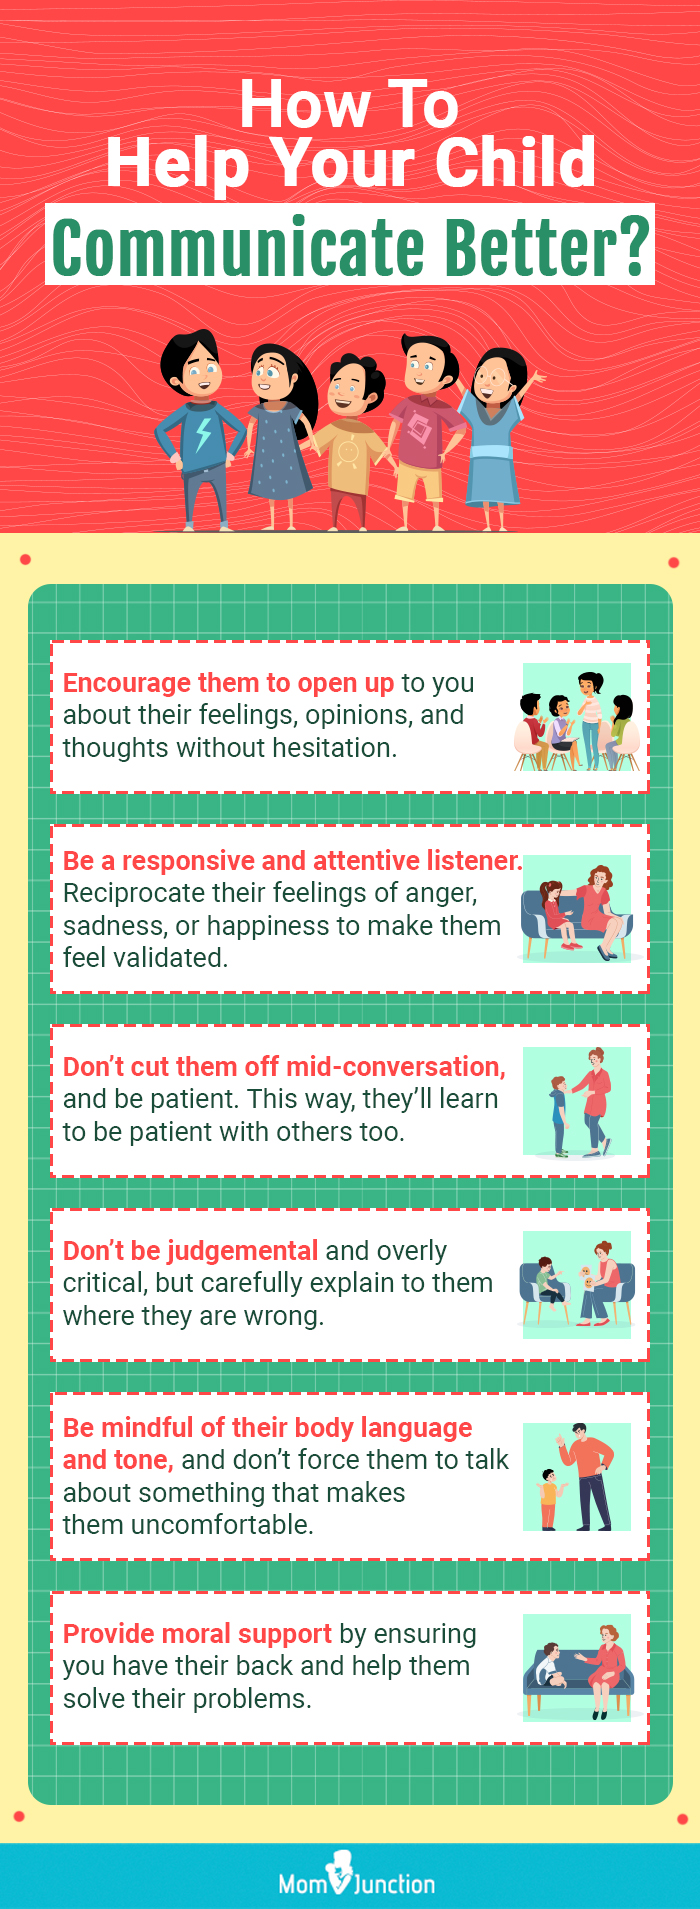 how to help your child communicate better [infographic]